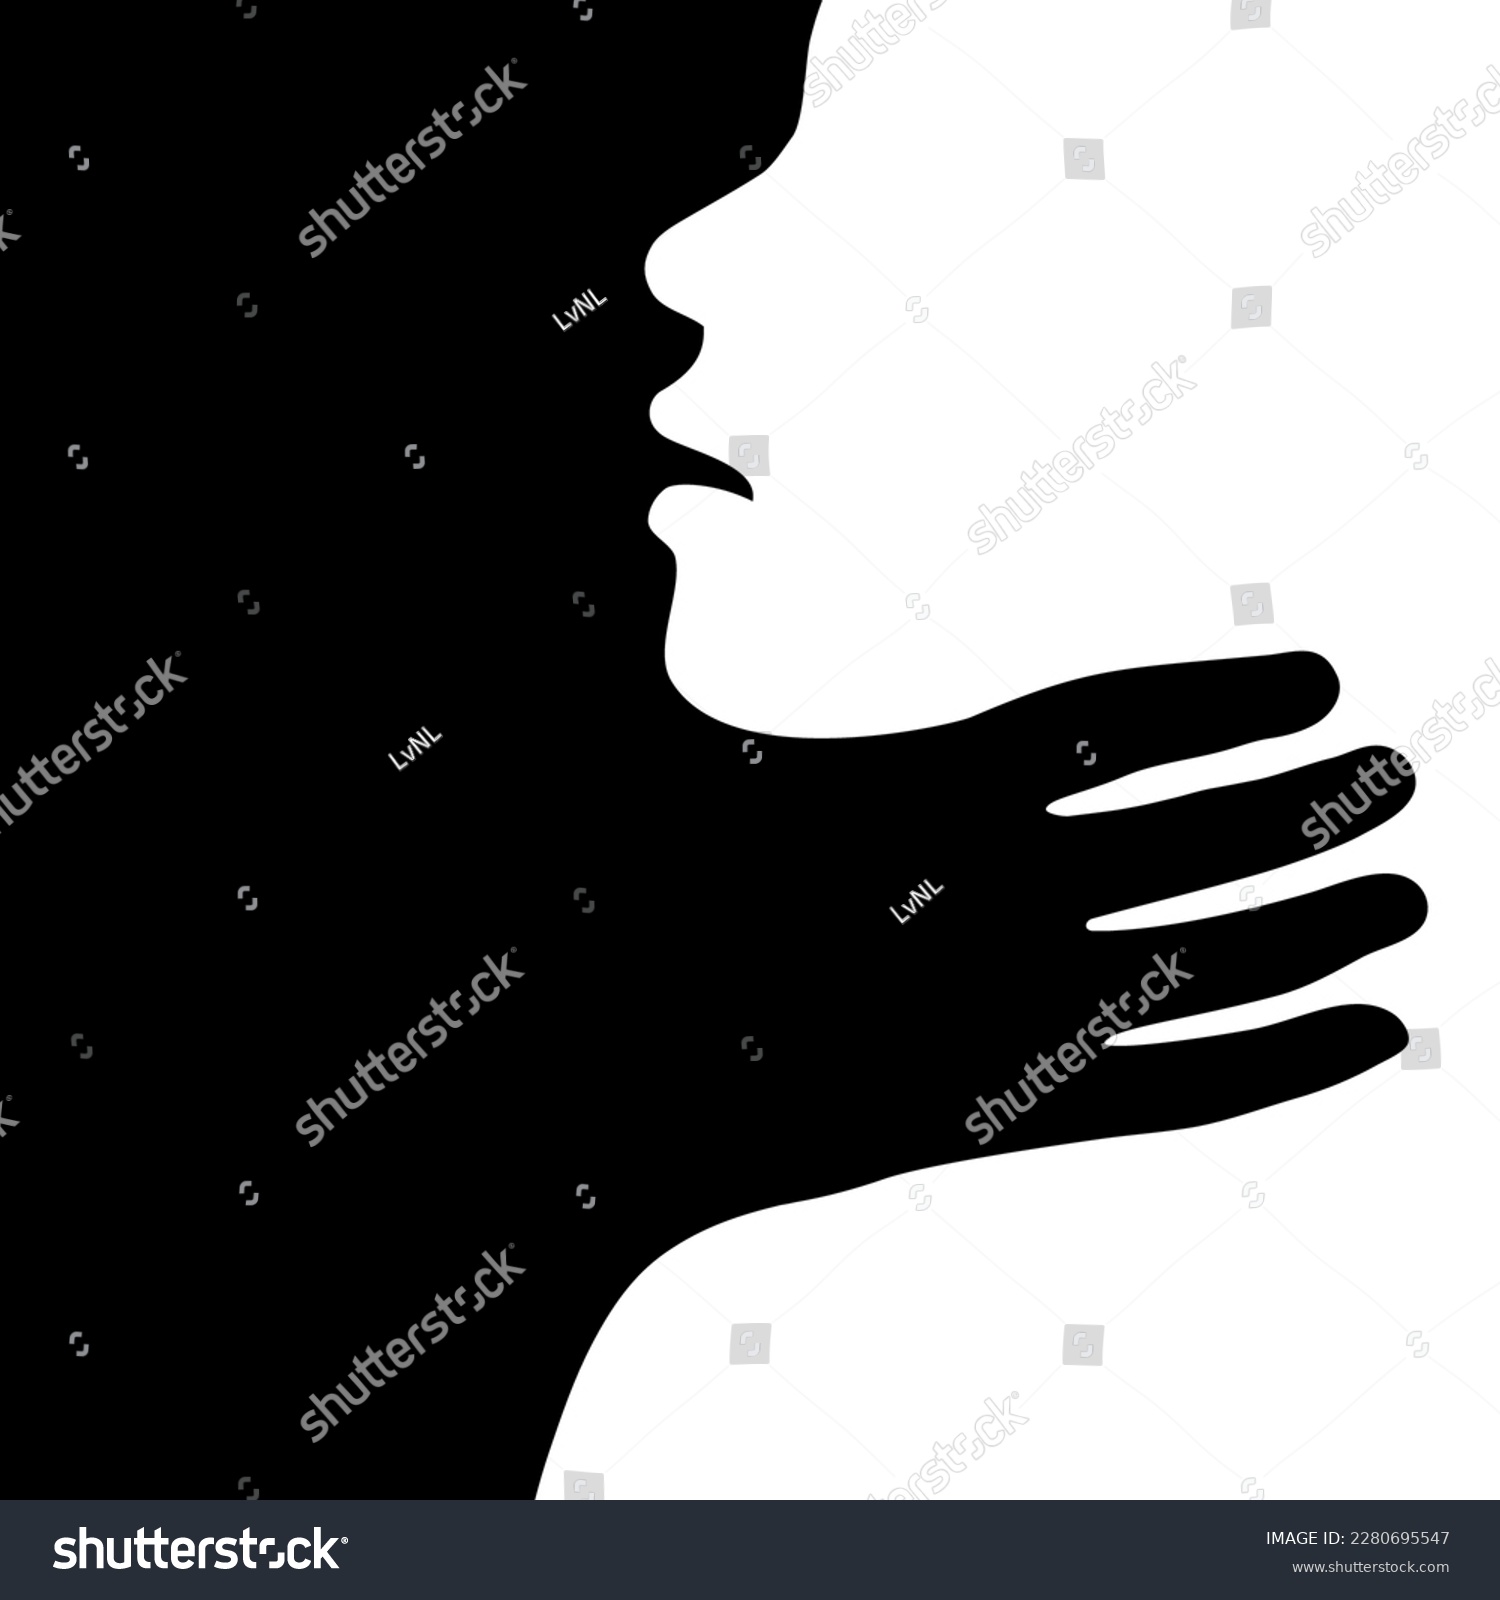 Hand strangling and choking the neck of a victim as abuse, domestic violence, harassment, physical attack or assault concept. Silhouette of a person being strangled, chocked, suffocated. #2280695547